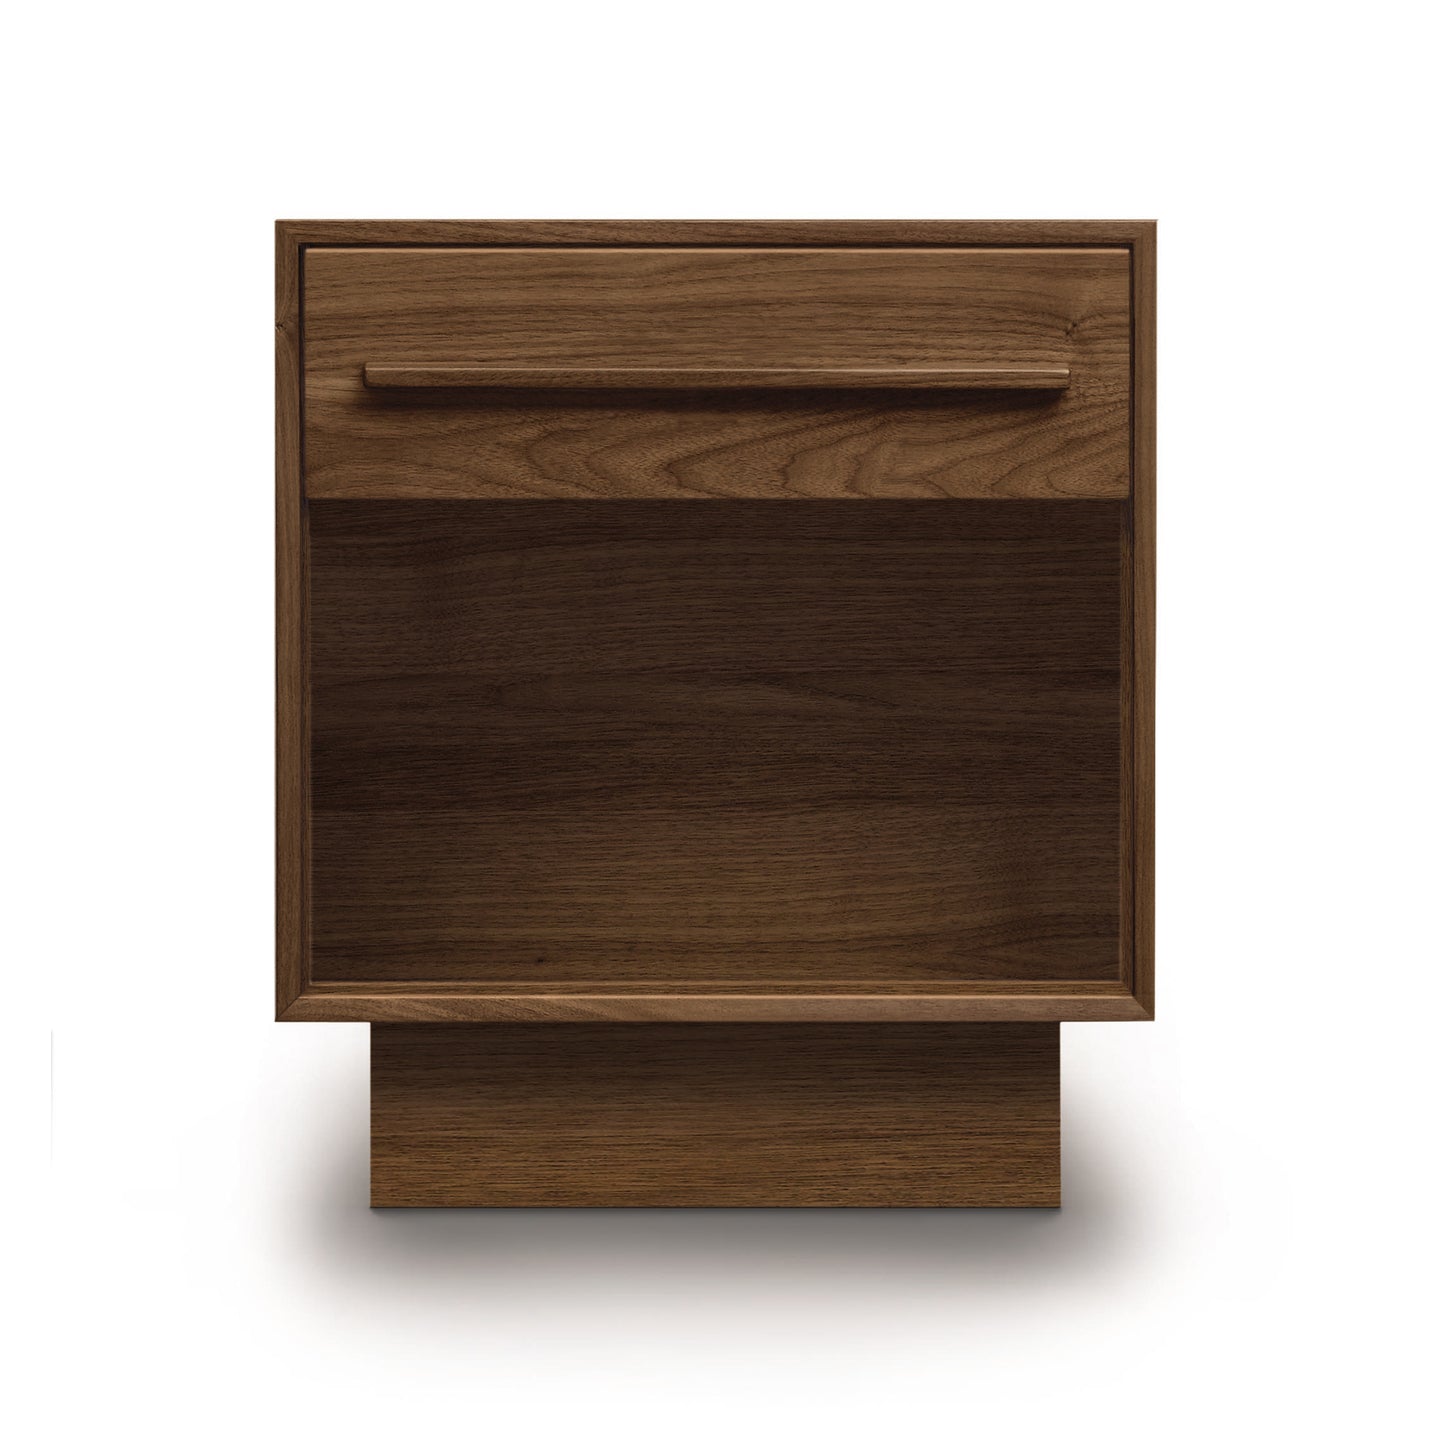 A Copeland Furniture Moduluxe 1-Drawer Enclosed Shelf Nightstand, made of wood, featuring a single drawer on top.